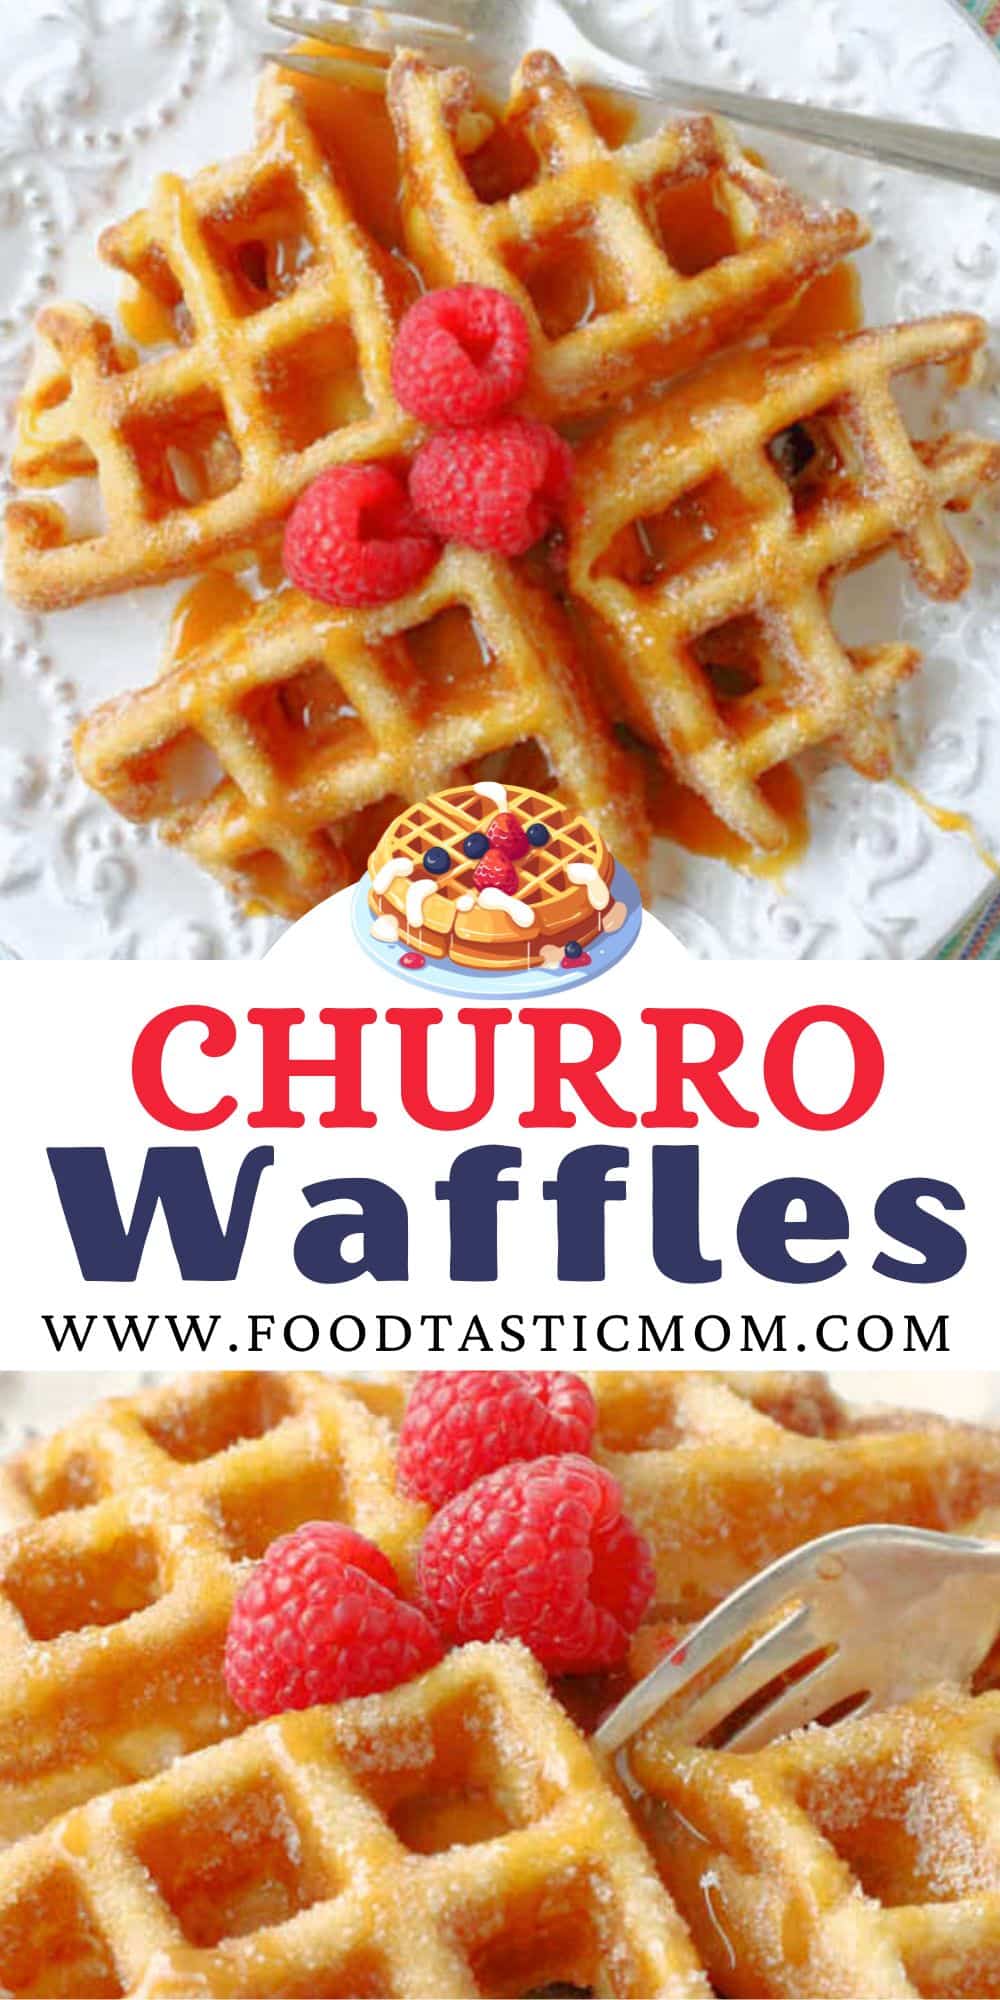 Churro Waffles are brushed with melted butter, coated in cinnamon sugar and drizzled with caramel sauce for an amazing treat any time of day. via @foodtasticmom